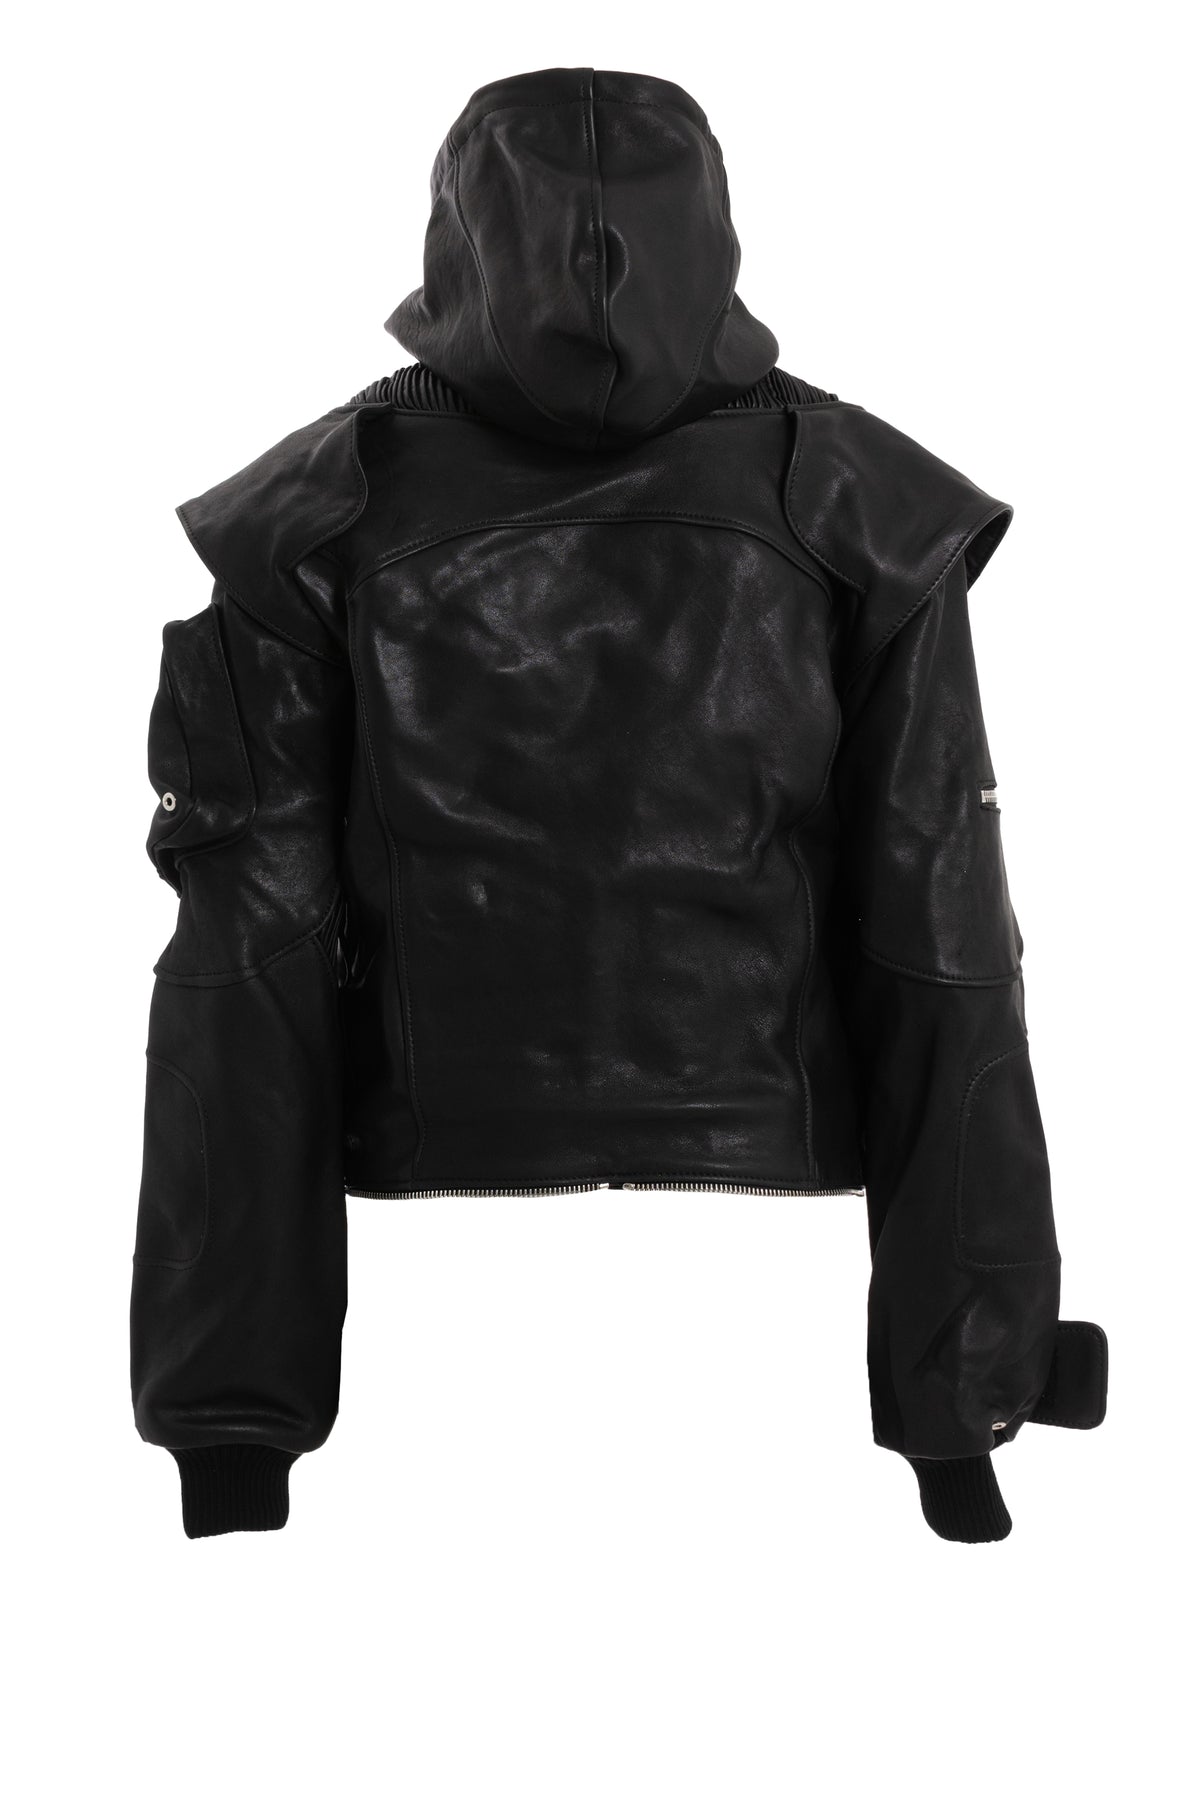 ASTRO LEATHER JACKET / BLK